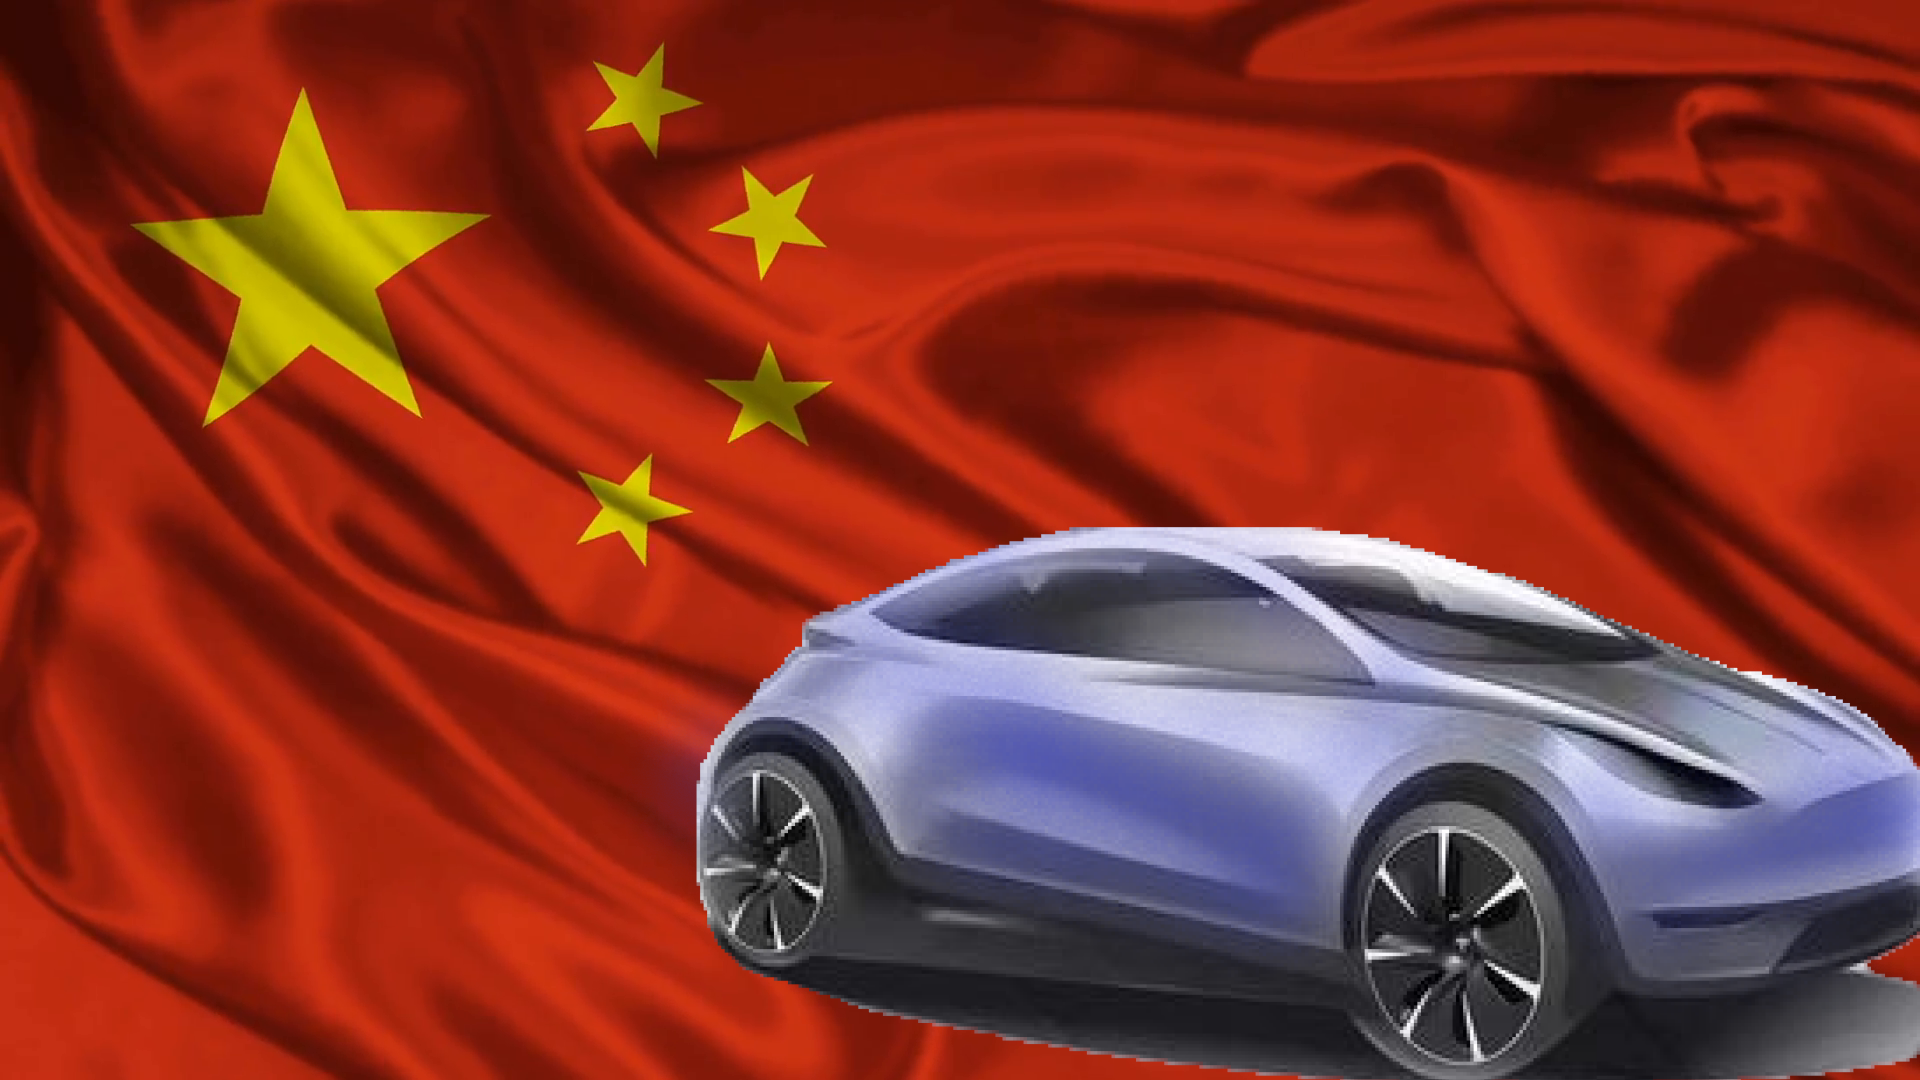 Tesla Giga Shanghai Is Now Accepting Vehicle Design Ideas From China, Possibly The Model C